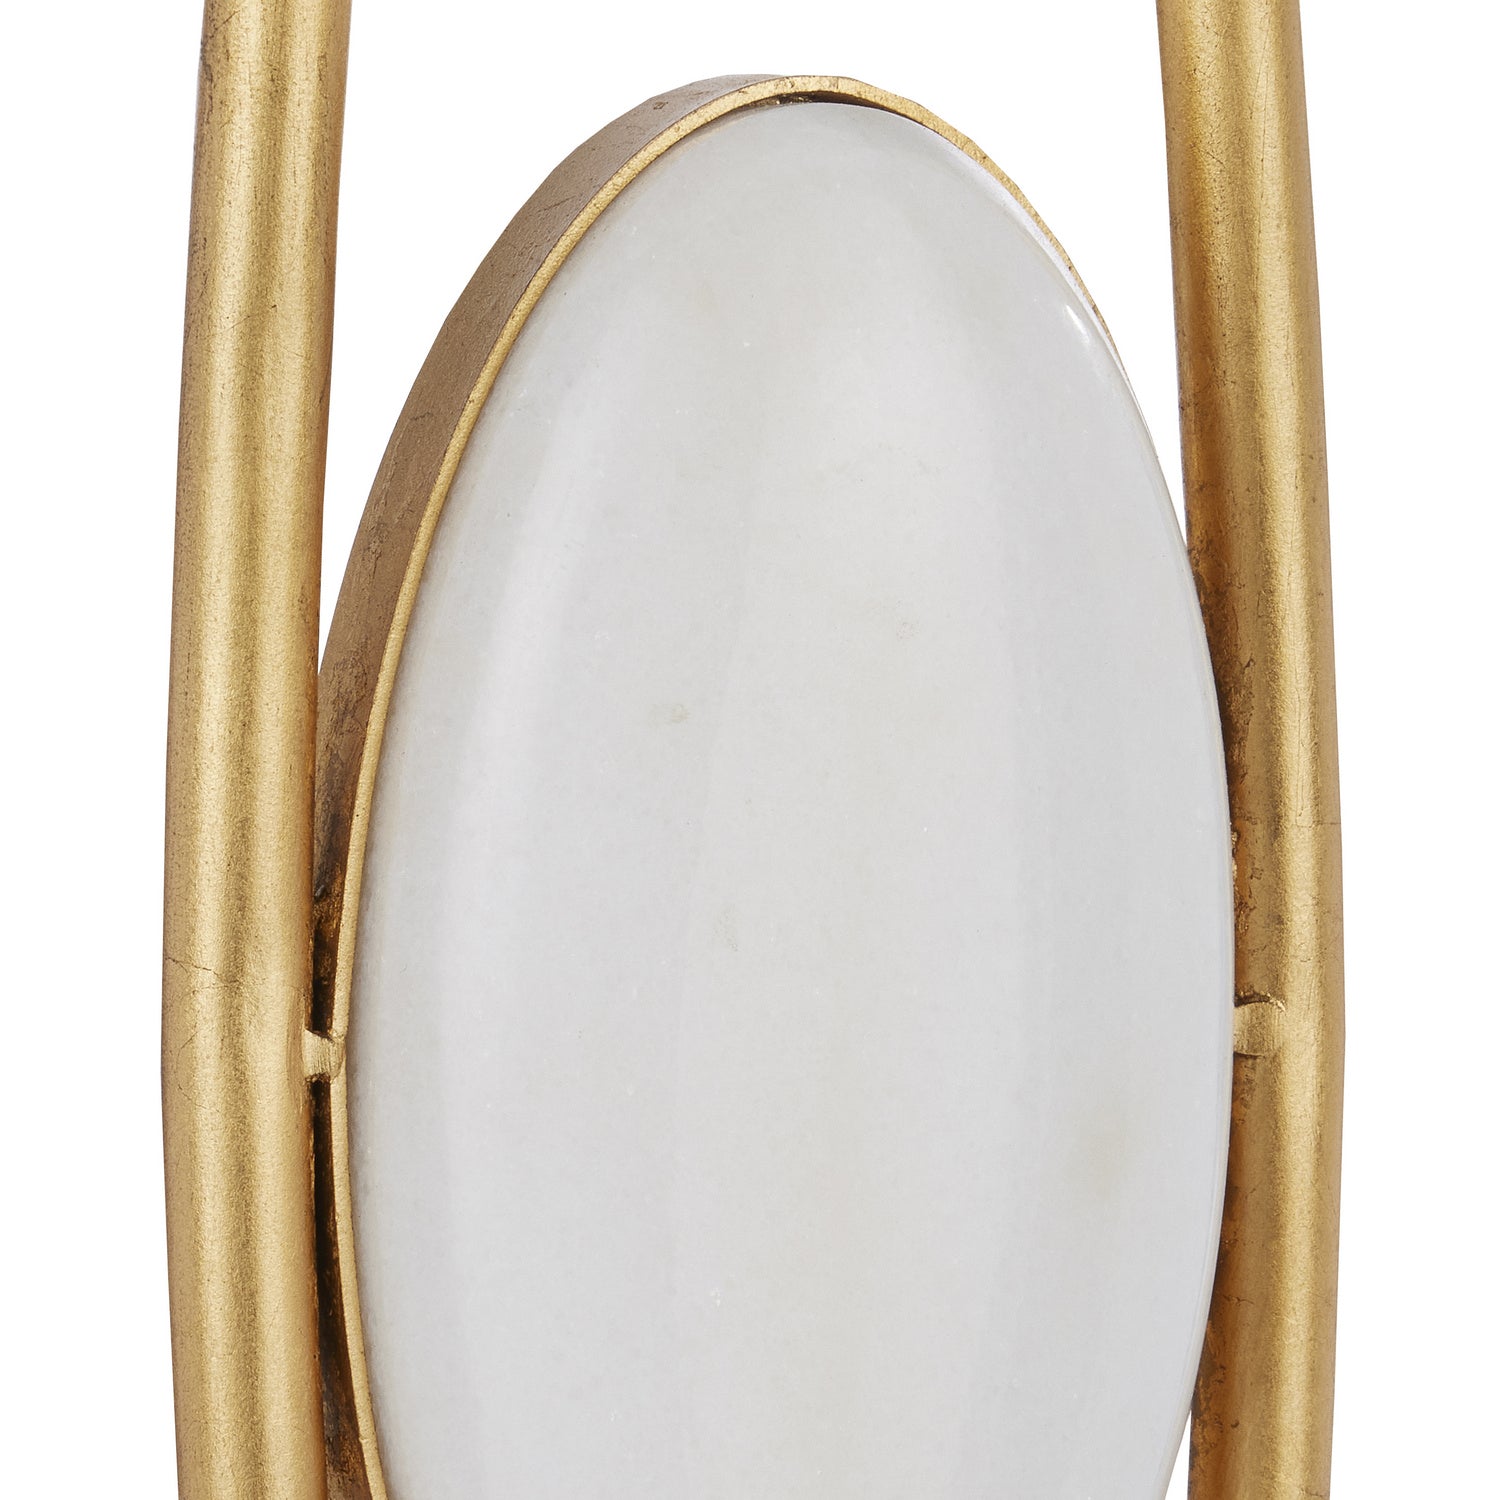 One Light Floor Lamp from the Marlene collection in Gold Leaf/White finish